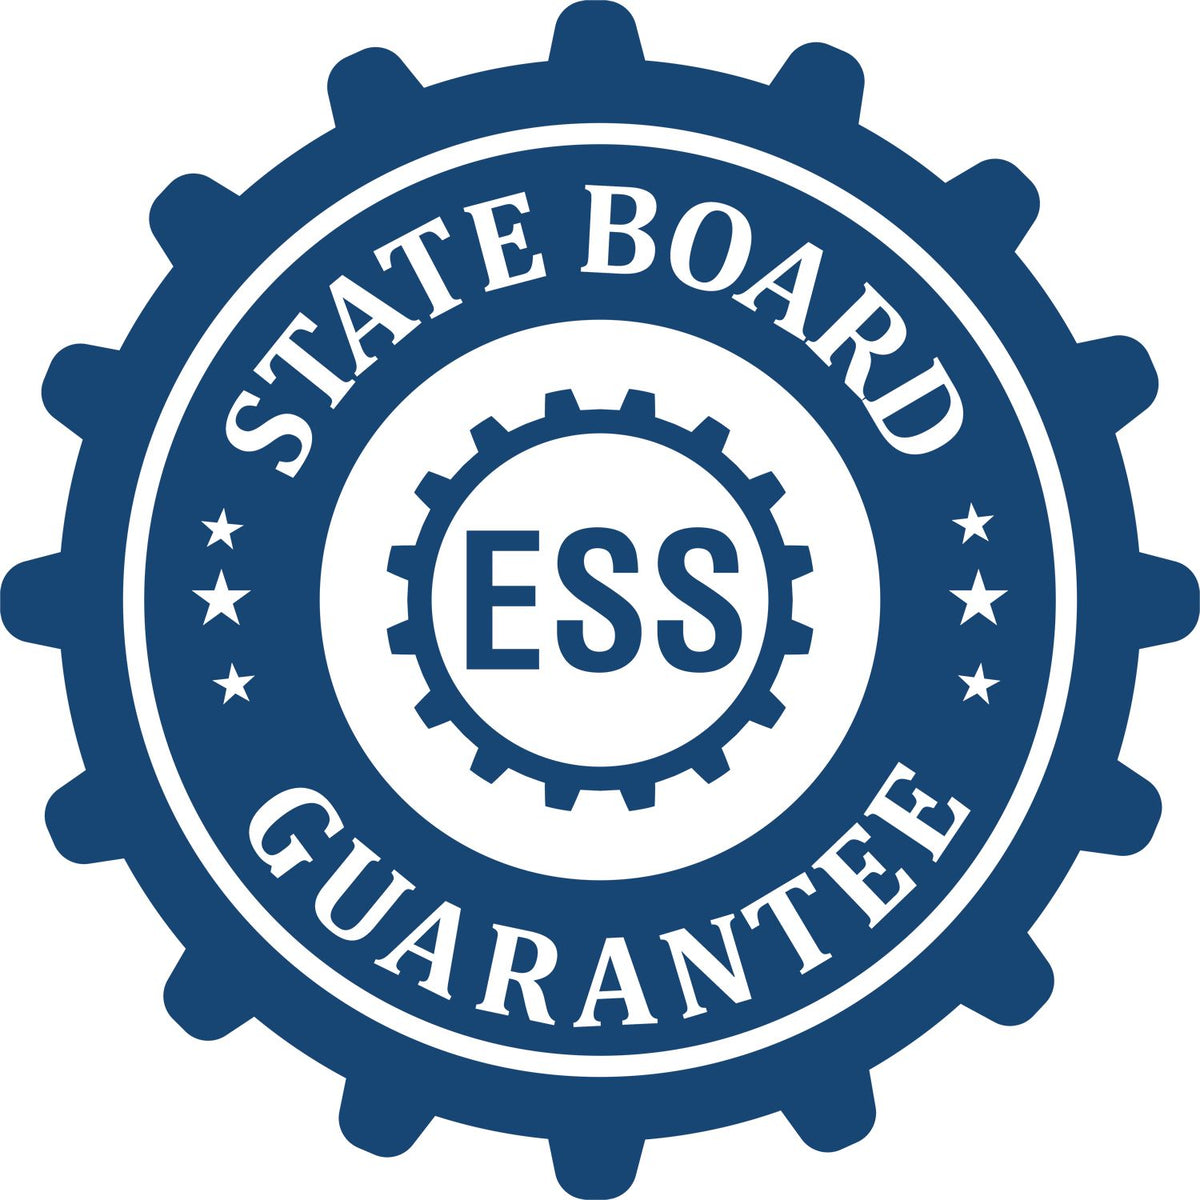 An emblem in a gear shape illustrating a state board guarantee for the Wooden Handle Wisconsin State Seal Notary Public Stamp product.